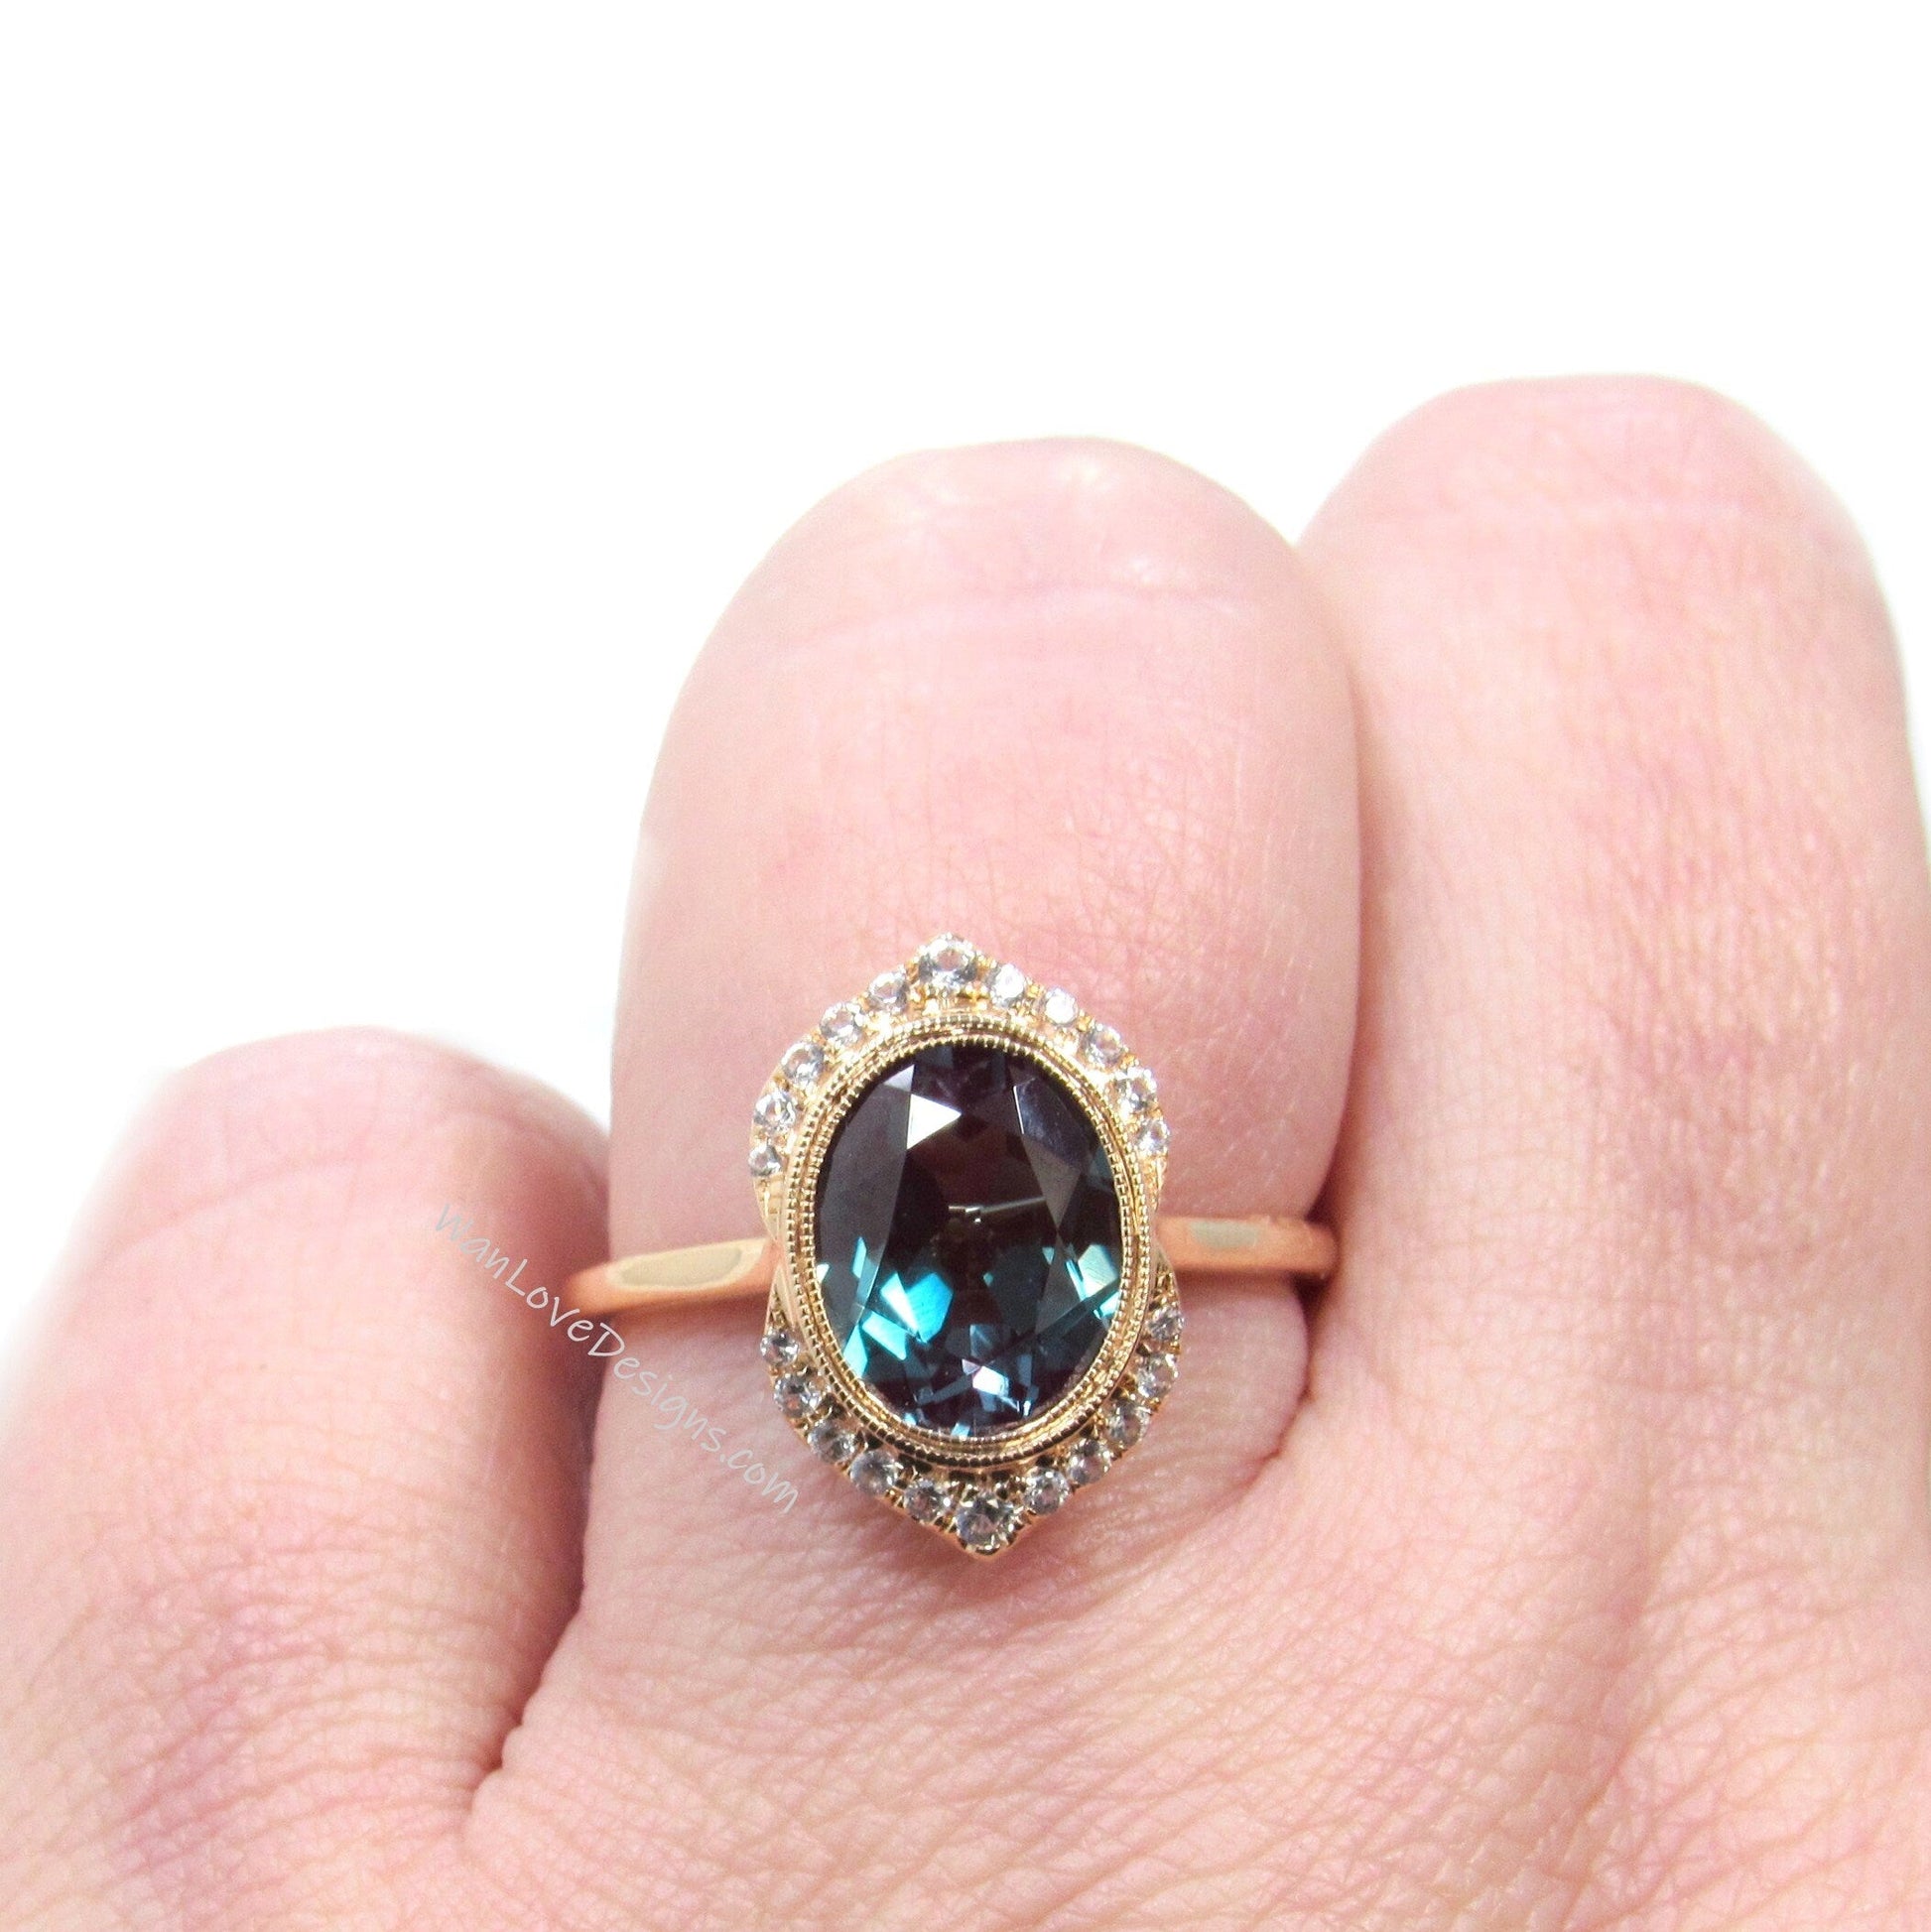 Alexandrite Diamond Art Deco Unique Oval Bezel Halo WITH or Without Milgrain Engagement Ring Unique Oval Halo Wedding Ring Diamond Gold Ring Wan Love Designs